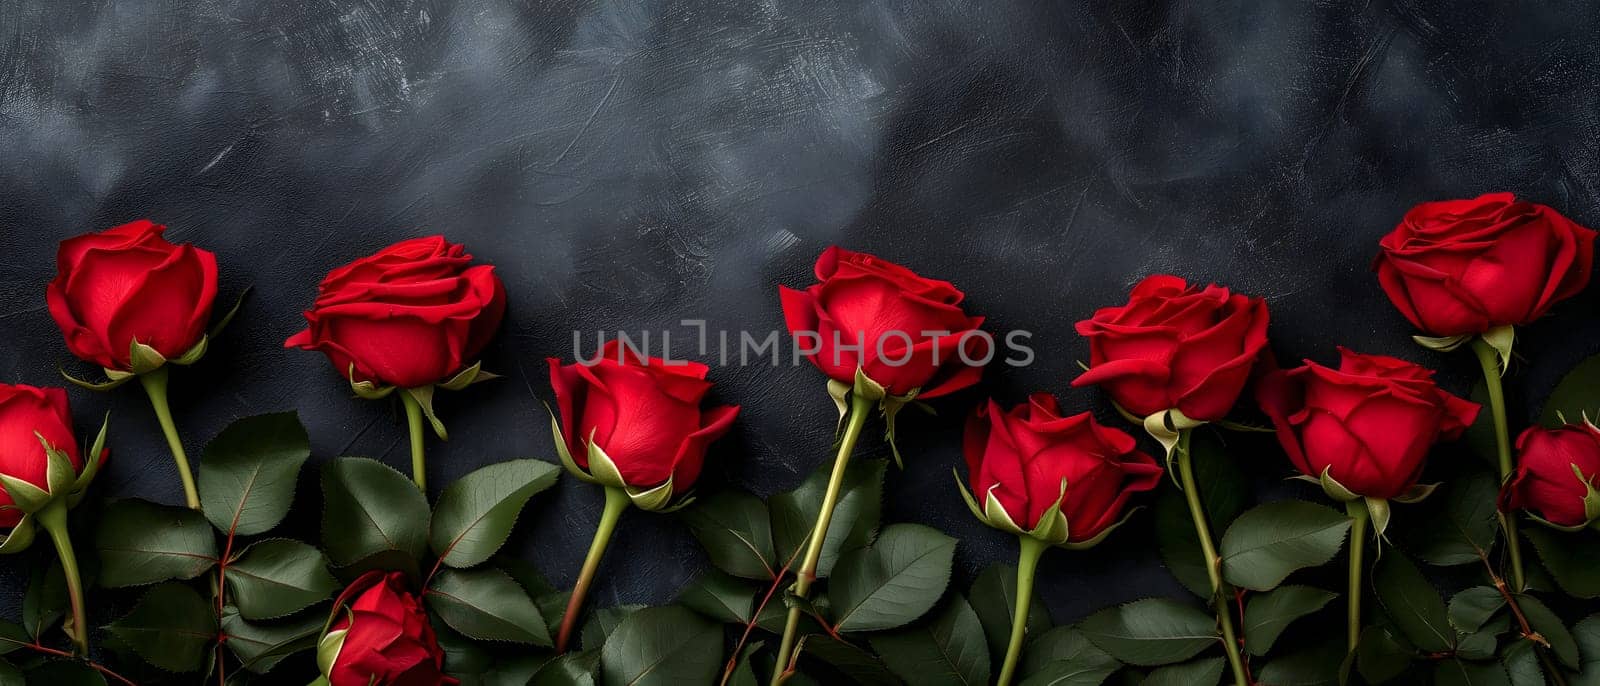 Red roses on black background with copy space. Neural network generated image. Not based on any actual person or scene.